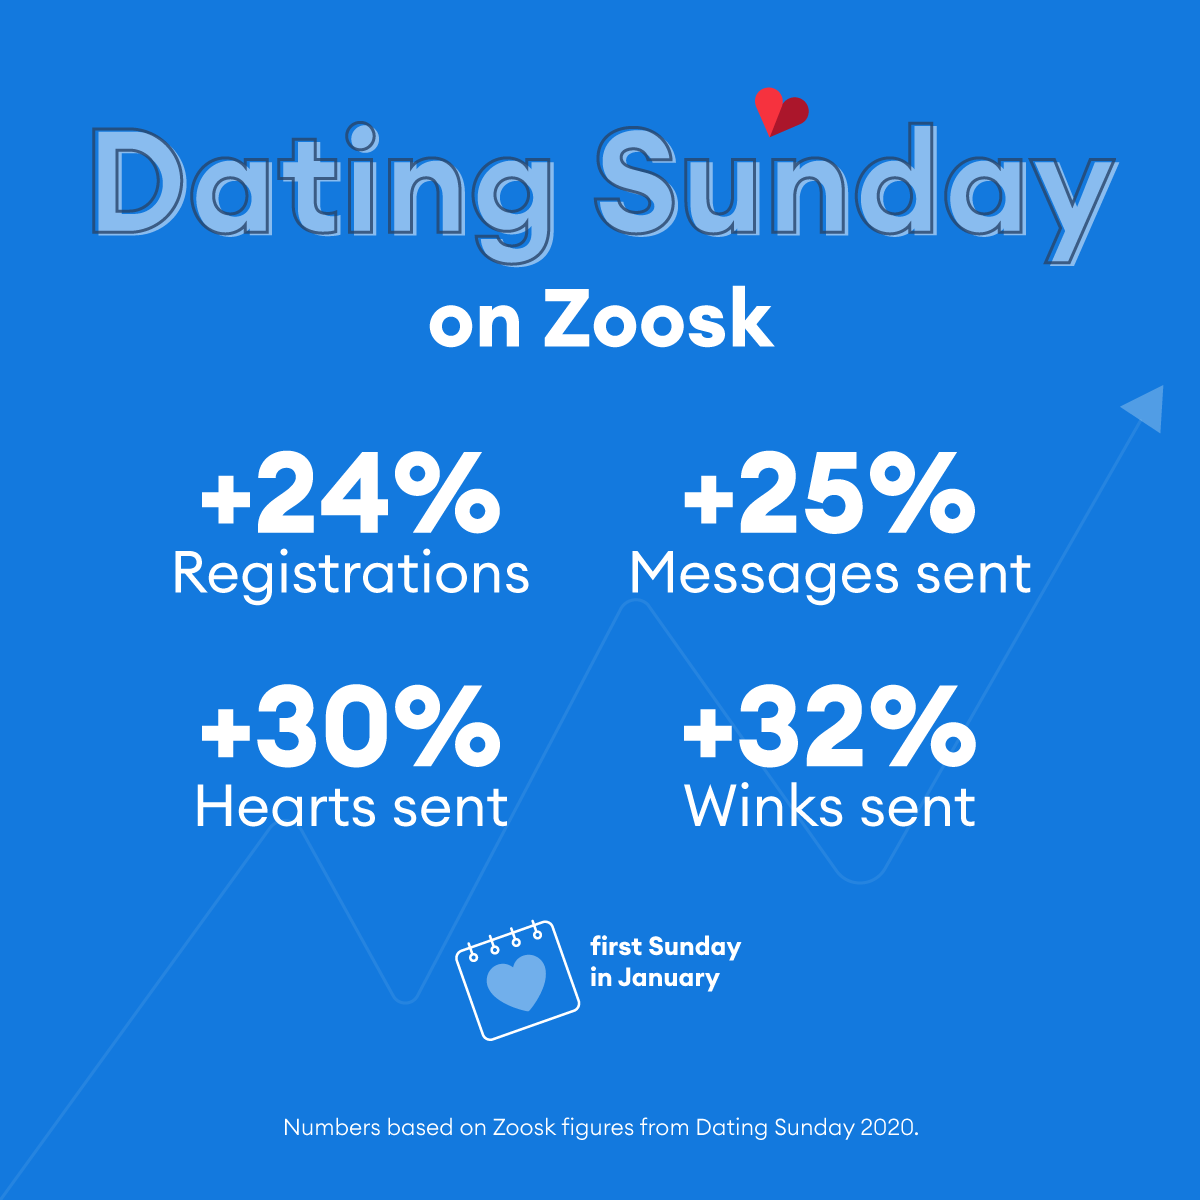 How to change interests on zoosk